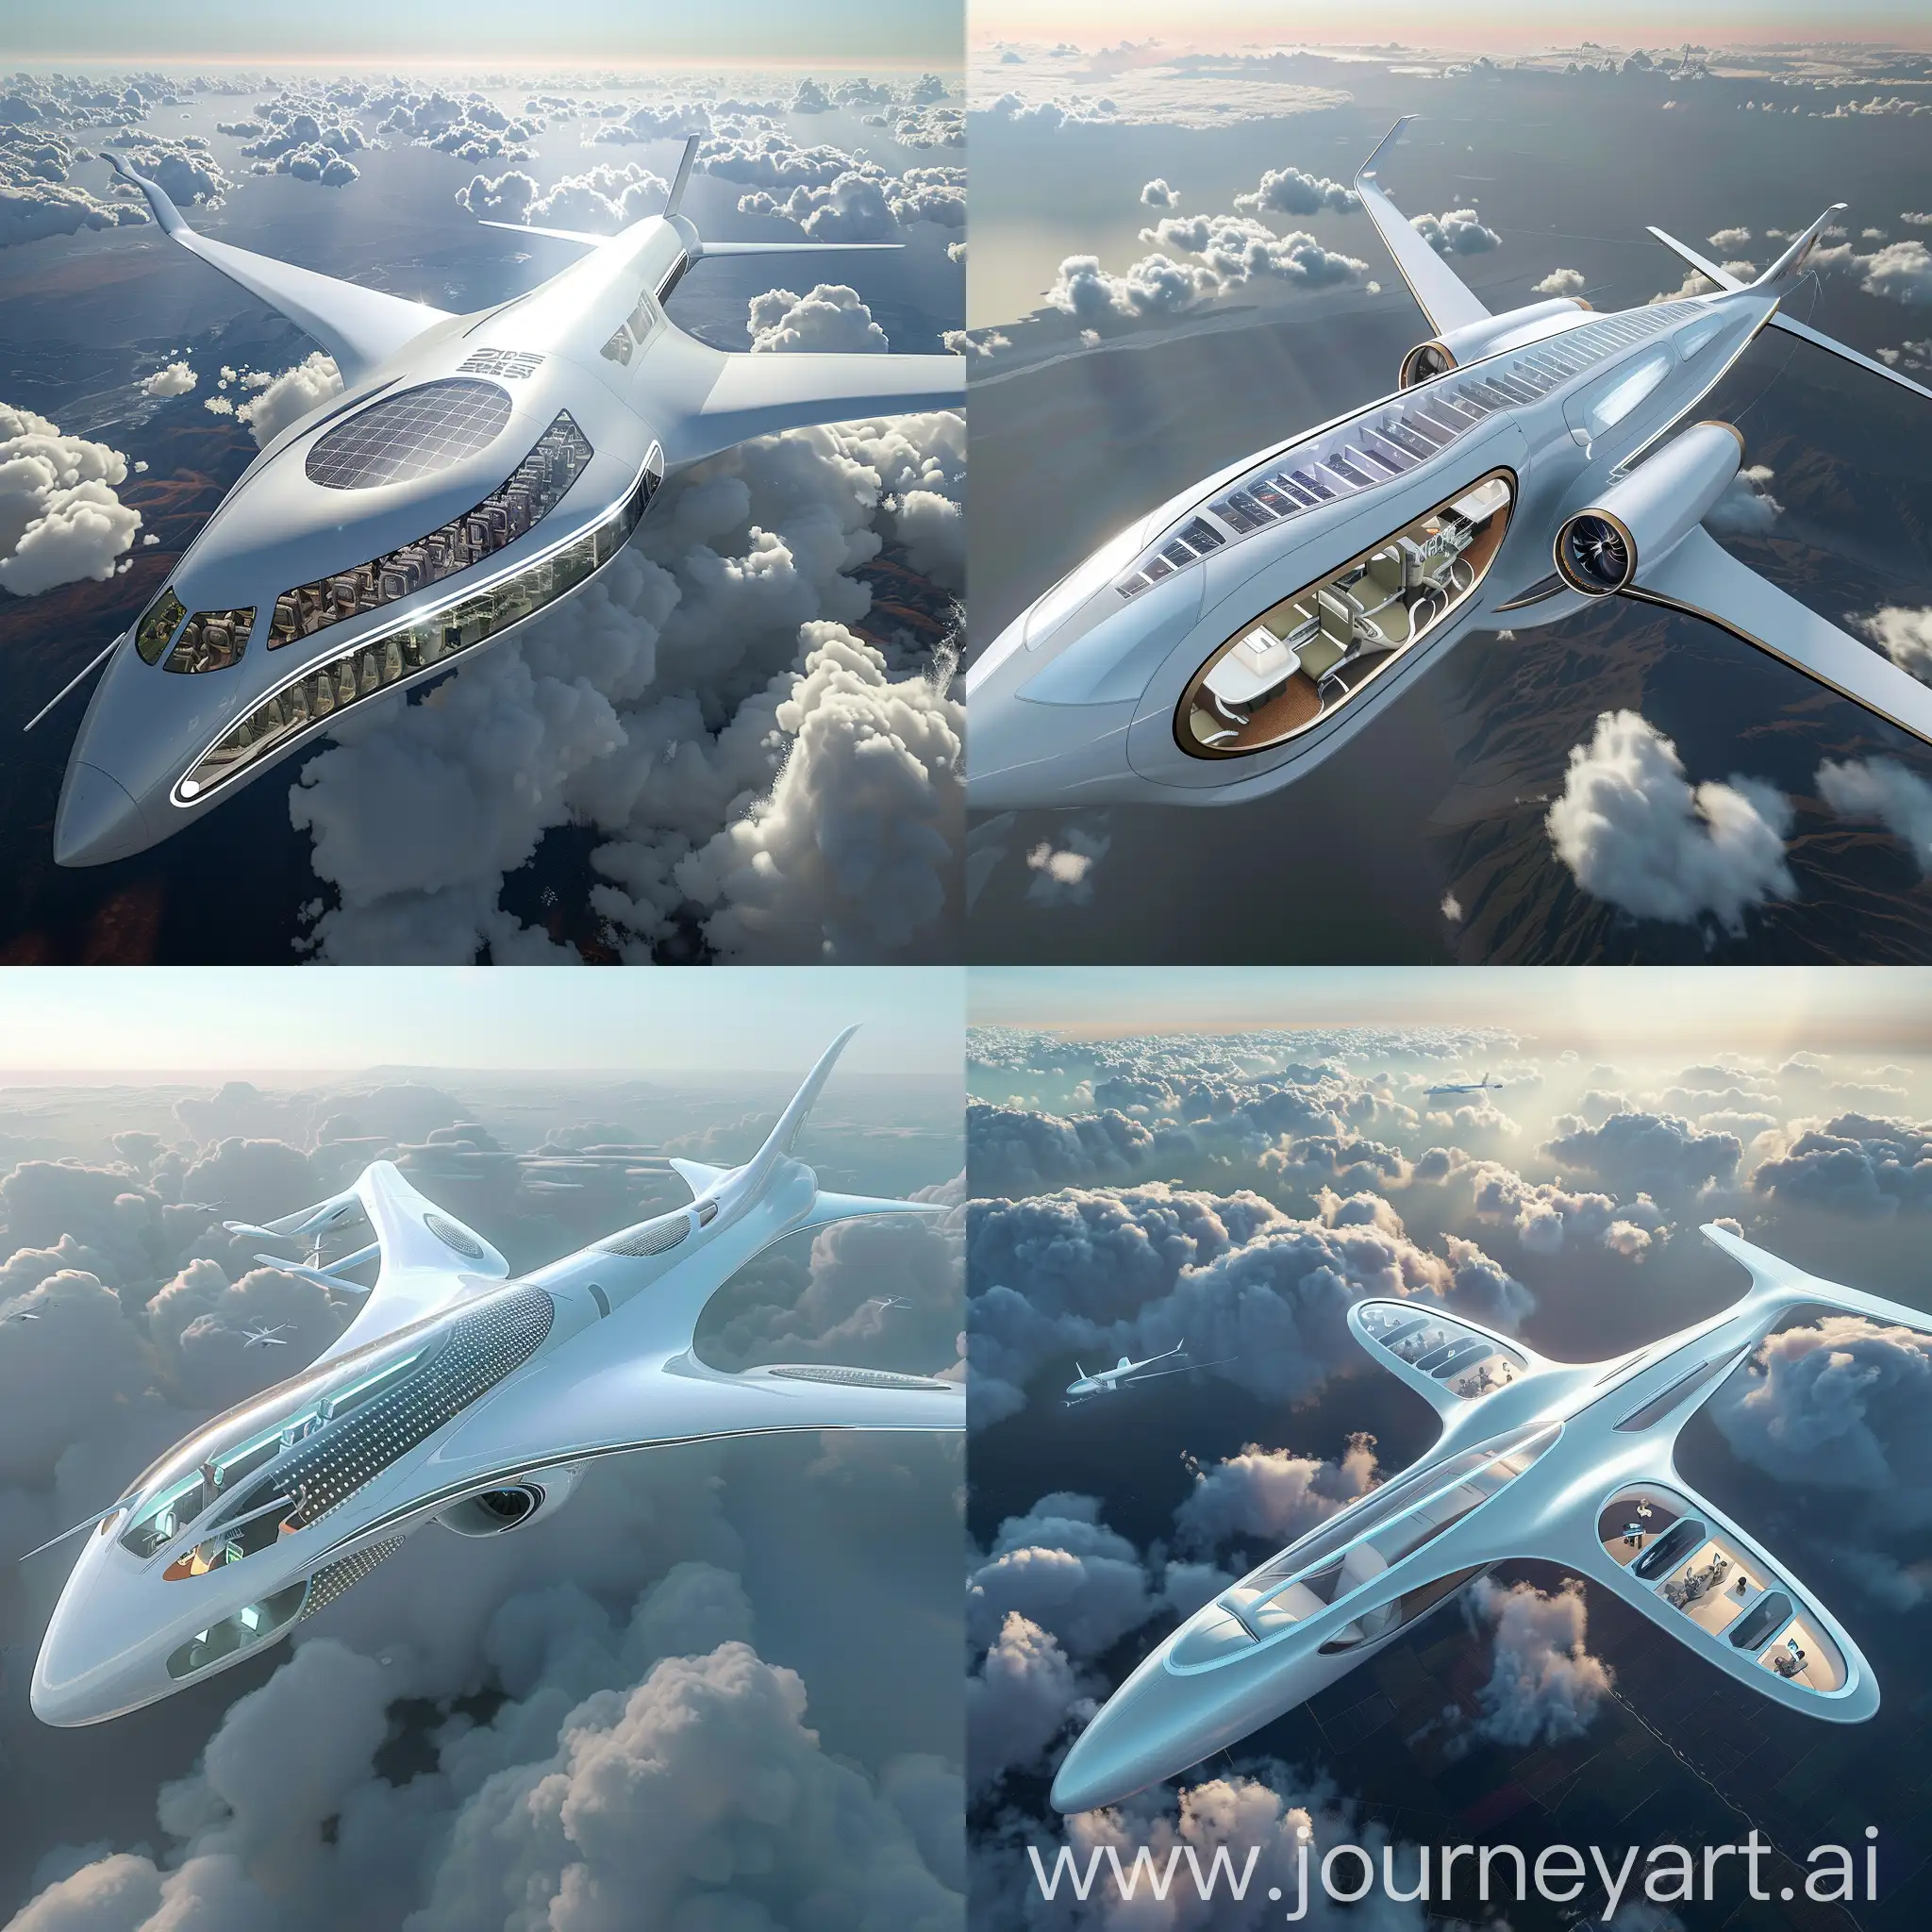 Futuristic passenger aircraft, in futuristic style, Smart Materials, Biometric Authentication, Augmented Reality (AR) Windows, Holographic Flight Attendants, Virtual Reality (VR) Entertainment Pods, Bioregenerative Air Filtration Systems, In-flight Health Monitoring, Dynamic Cabin Configurations, Silent Supersonic Travel, Artificial Intelligence (AI) Flight Assistants, Advanced Aerodynamics, Supersonic Propulsion Systems, Solar Panels, Adaptive Wing Morphing, Laser-Based Communication Systems, Active Noise Reduction, Advanced Radar and Sensor Systems, Self-Healing Skin, Electrochromic Windows, Drone Delivery Systems, Carbon Fiber Composites, Advanced Lightweight Seating, Thin-Film Solar Panels, 3D-Printed Components, Advanced Lightweight Galley Equipment:, Ultralight Insulation Materials, Thin-Layered Interior Finishes, Integrated Lightweight Cabin Systems, Carbon Nanotube Wiring, Flexible Interior Layouts, Composite Fuselage, Wingtip Winglets, Carbon Fiber Wing Structure, Titanium Landing Gear, Advanced Lightweight Engine Components, Flexible Solar Panel Arrays, Hybrid Composite Wingbox, Electrically Powered Flight Control Surfaces, Lightweight Anti-Icing Systems, Aerogel Insulation, unreal engine 5 --stylize 1000